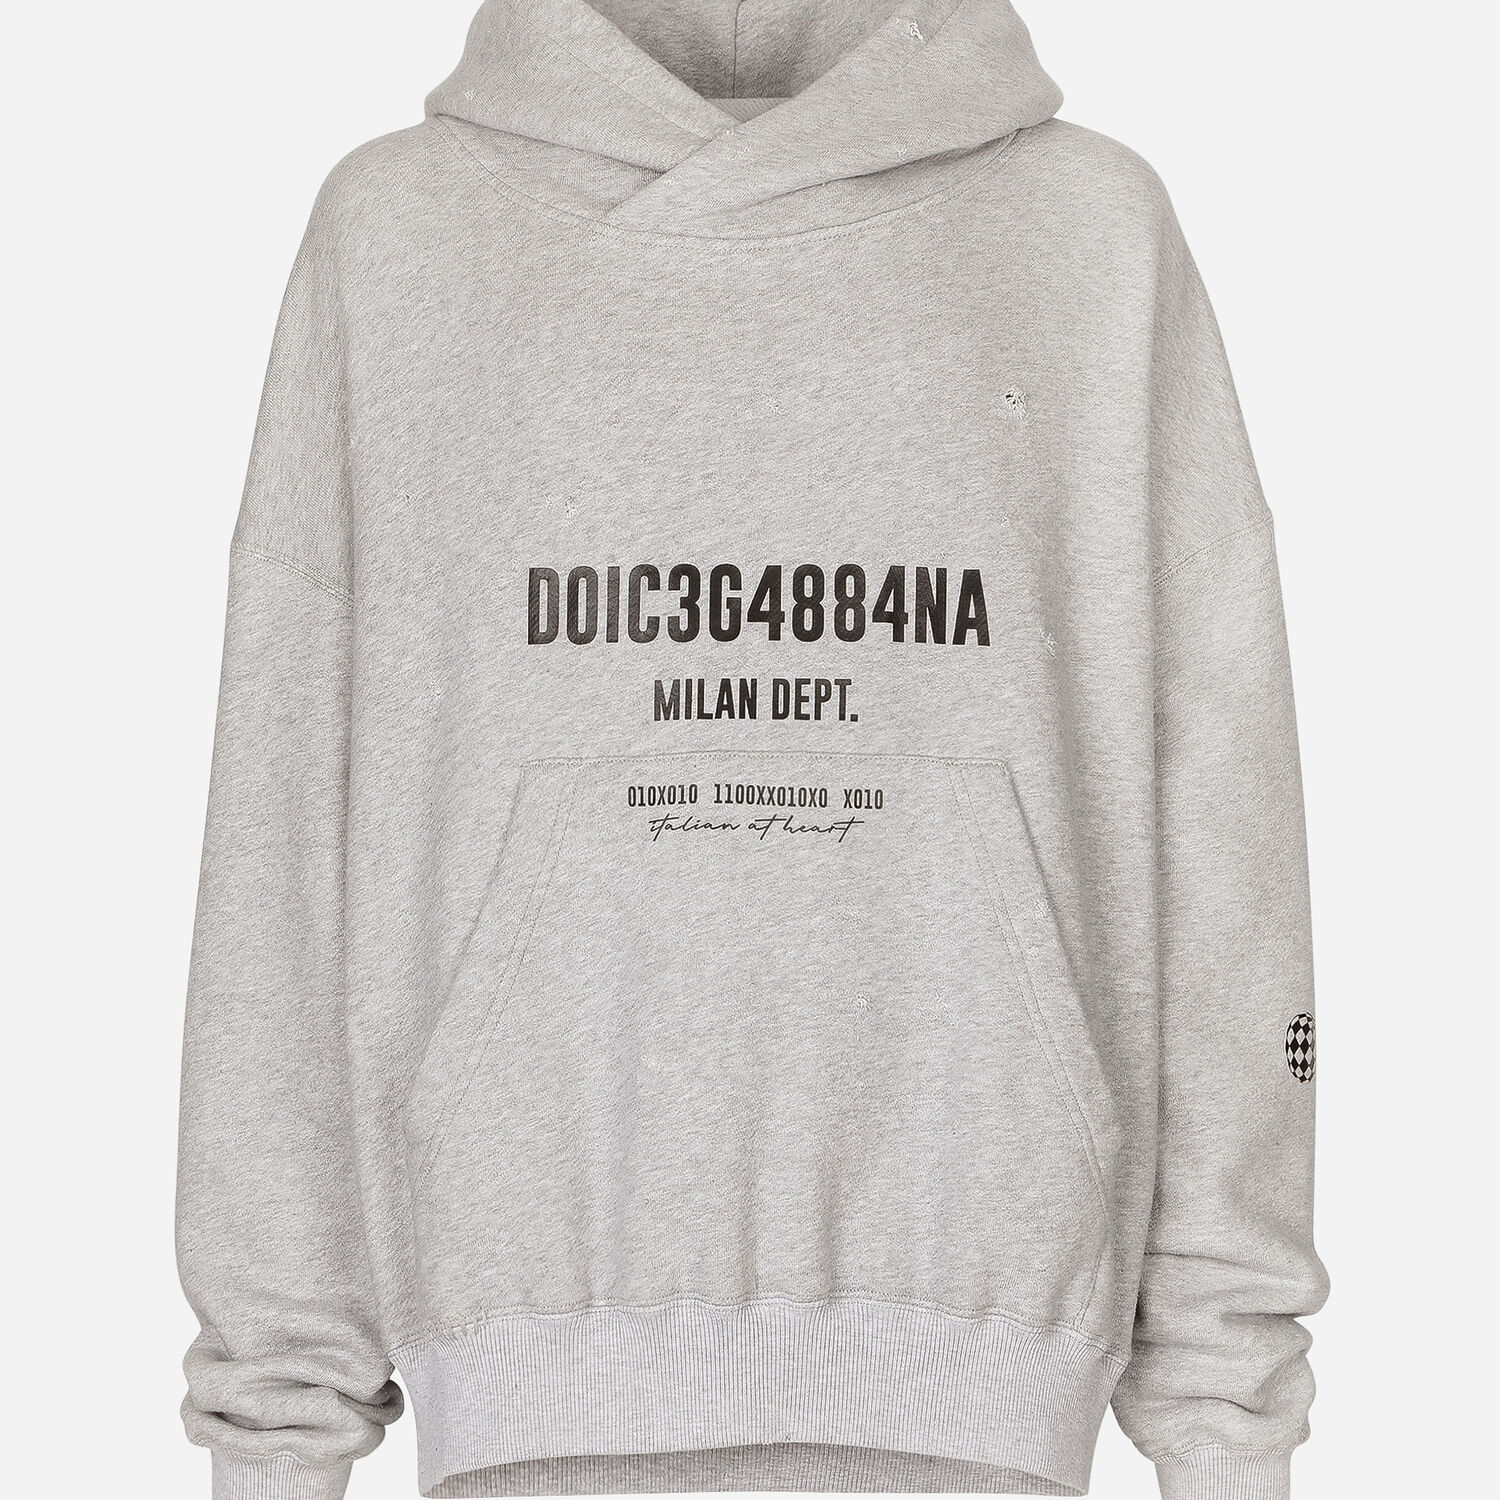 Preis ist unschlagbar Jersey hoodie | in for Dolce&Gabbana® Grey US with print logo